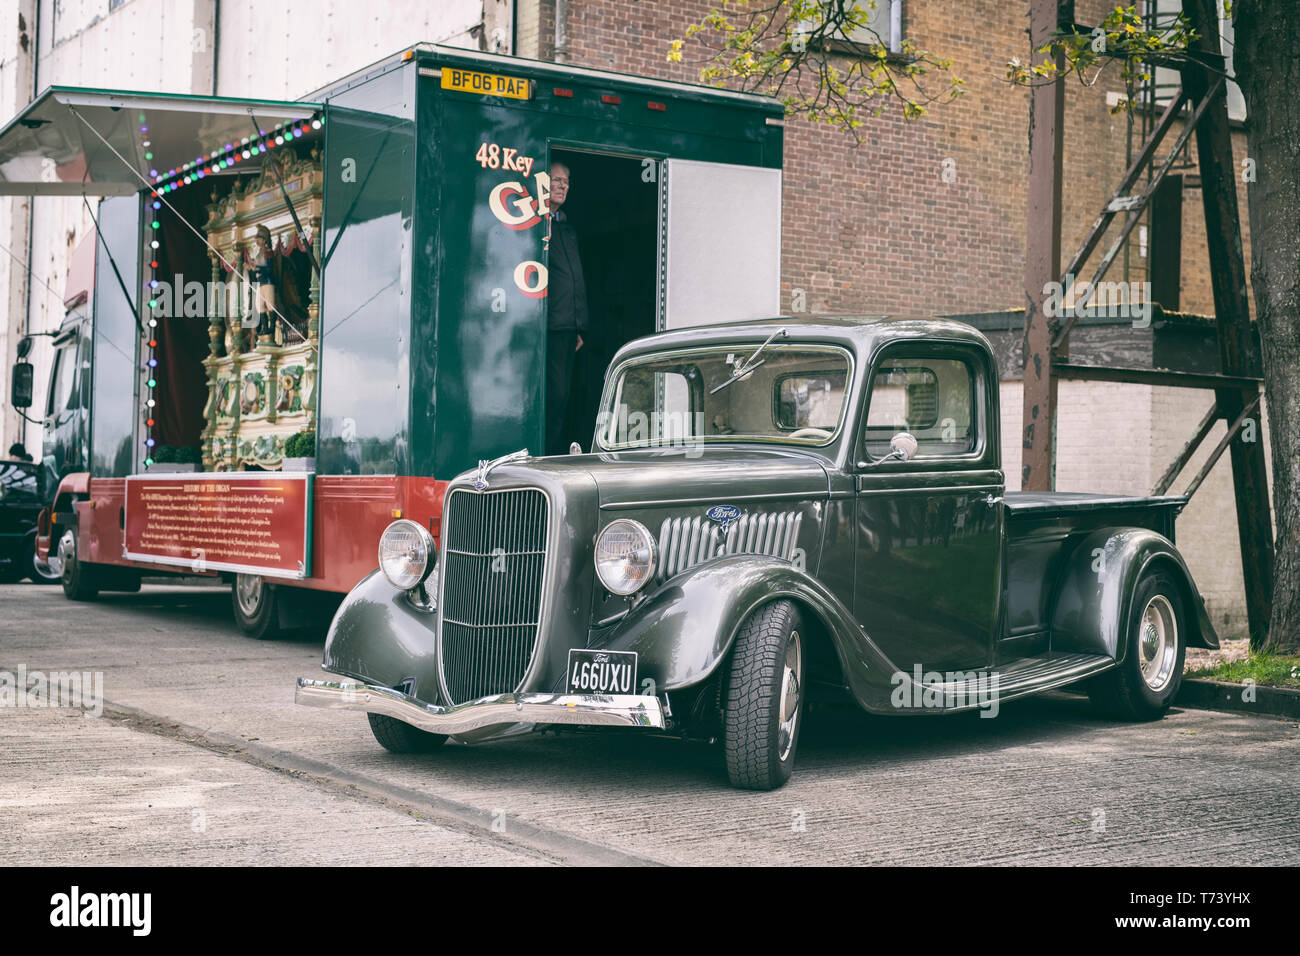 1936 Ford pick up truck in front of a Victorian fairground organ at Bicester heritage centre, 'Drive It Day'. Bicester, Oxfordshire, England. Stock Photo